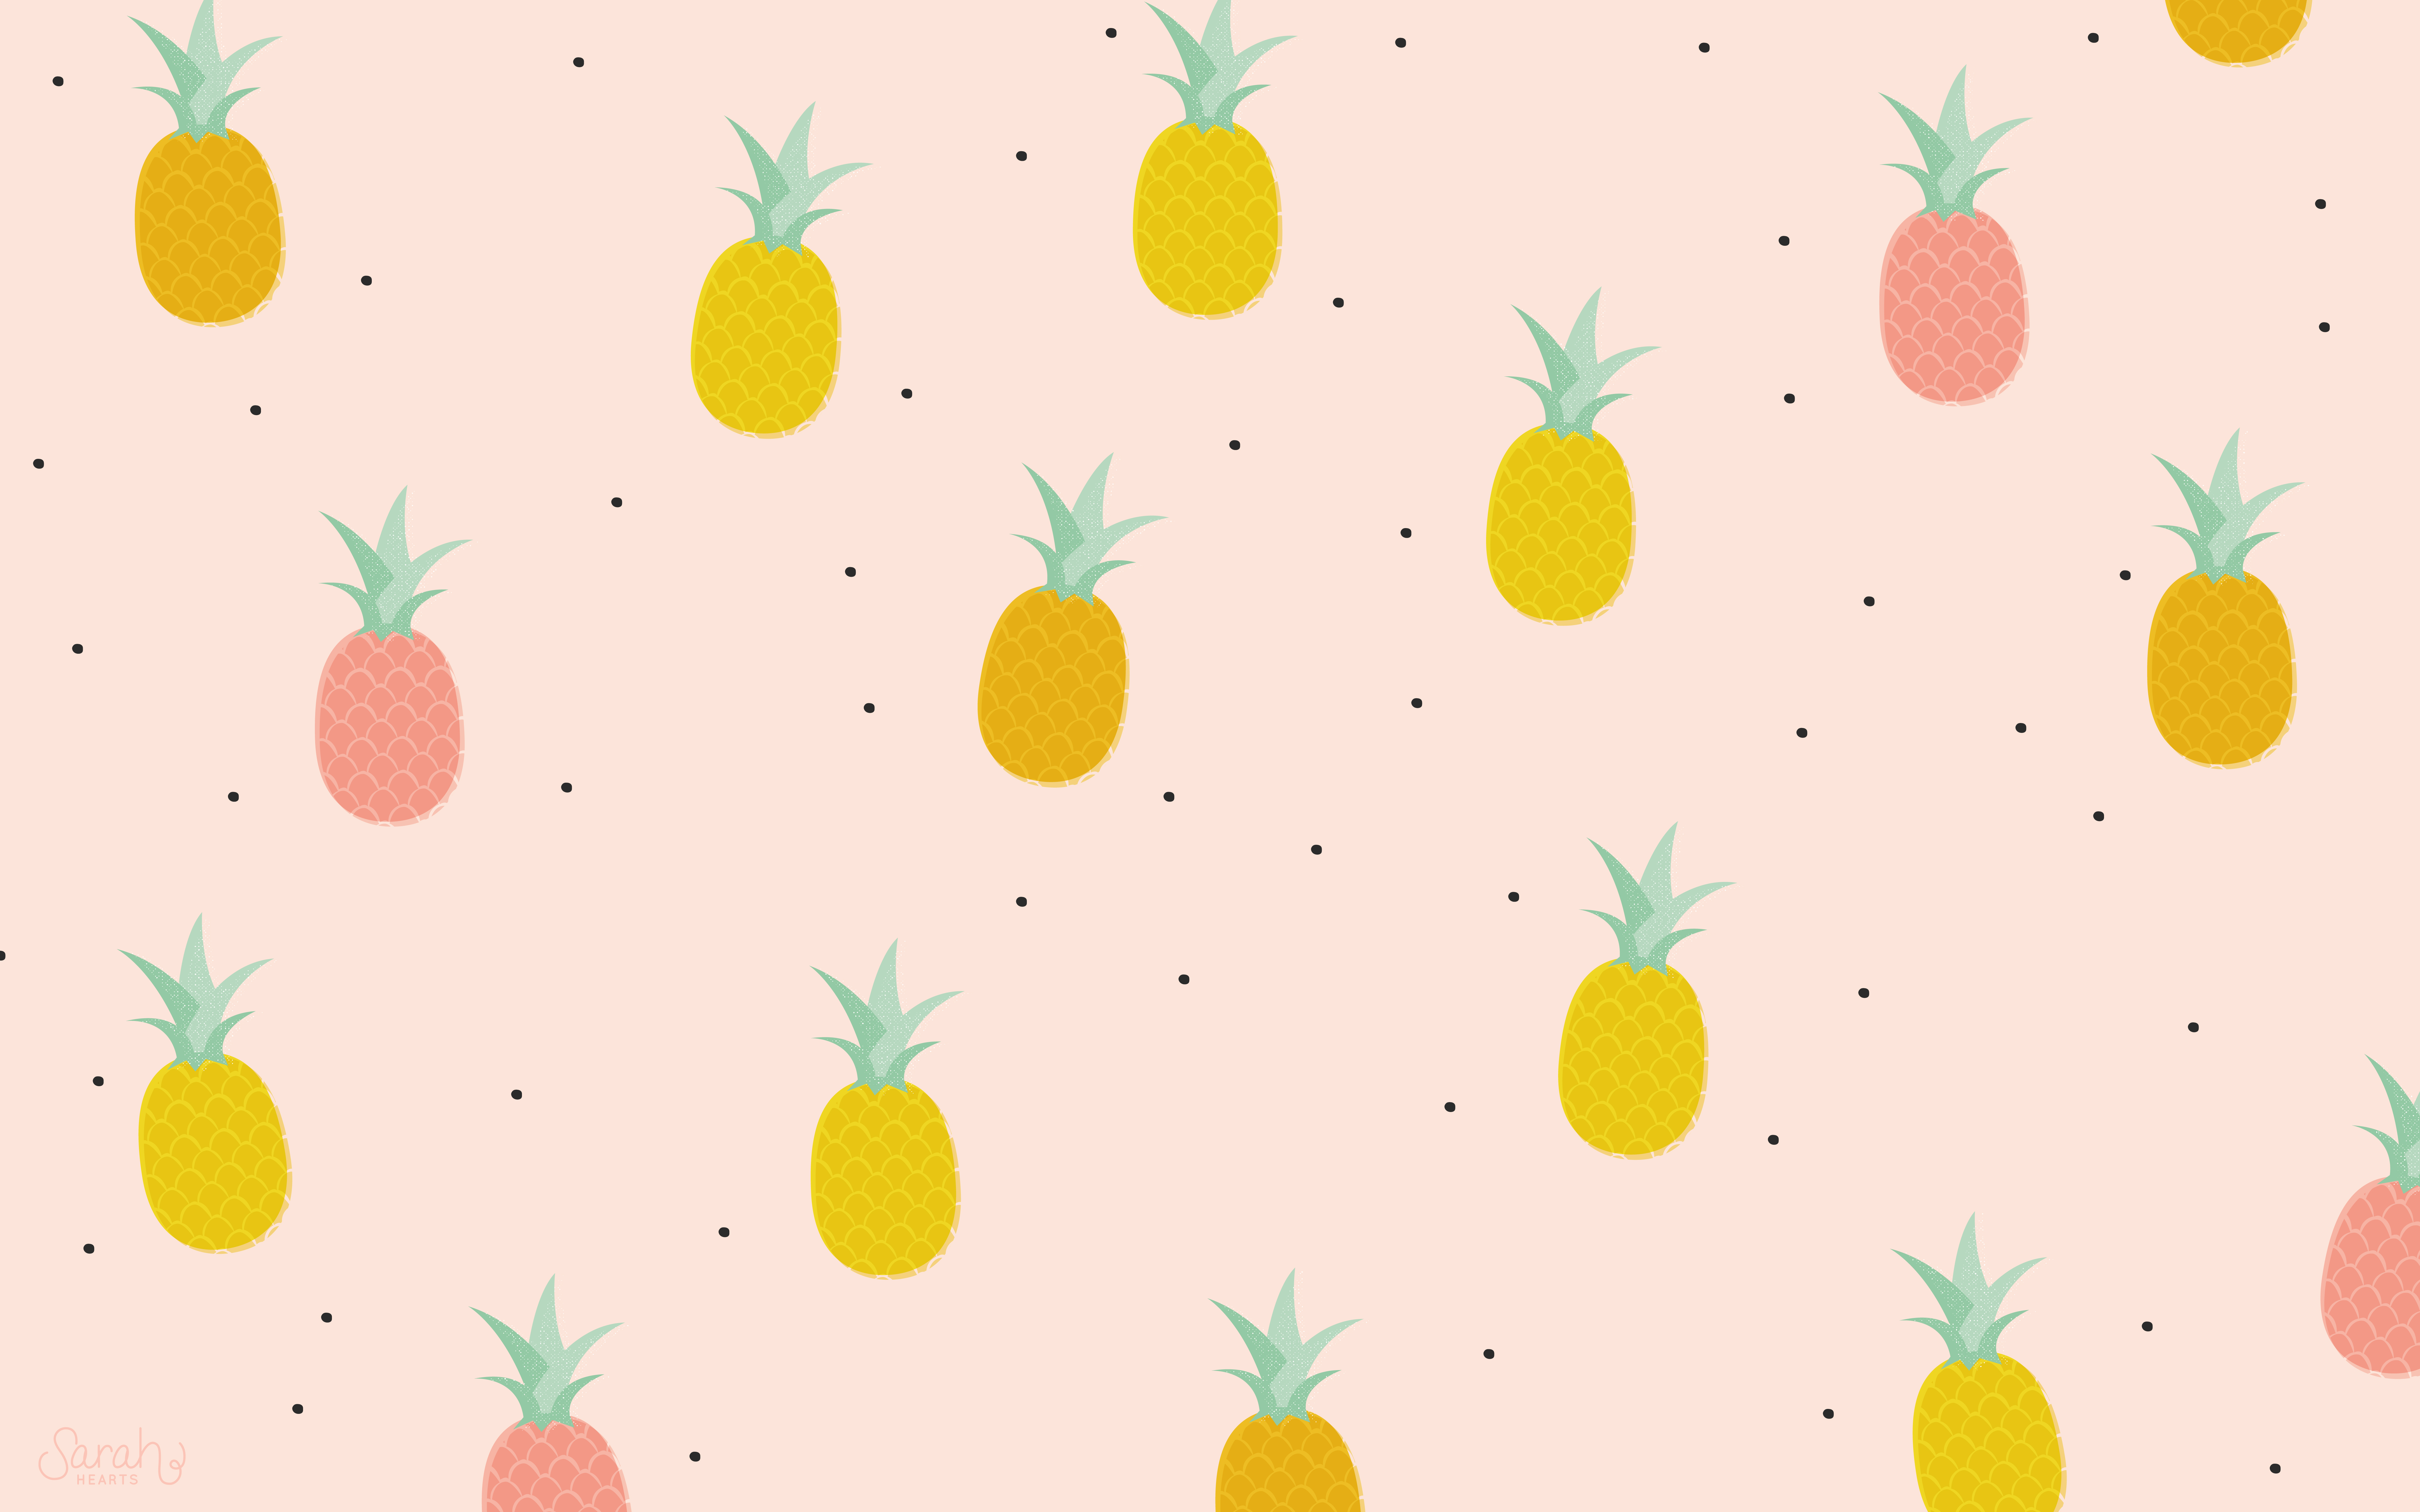 Cute Pineapple Wallpaper Desktop Wallpapers Hd Background Cute Pictures Of Pineapples  Background Image And Wallpaper for Free Download